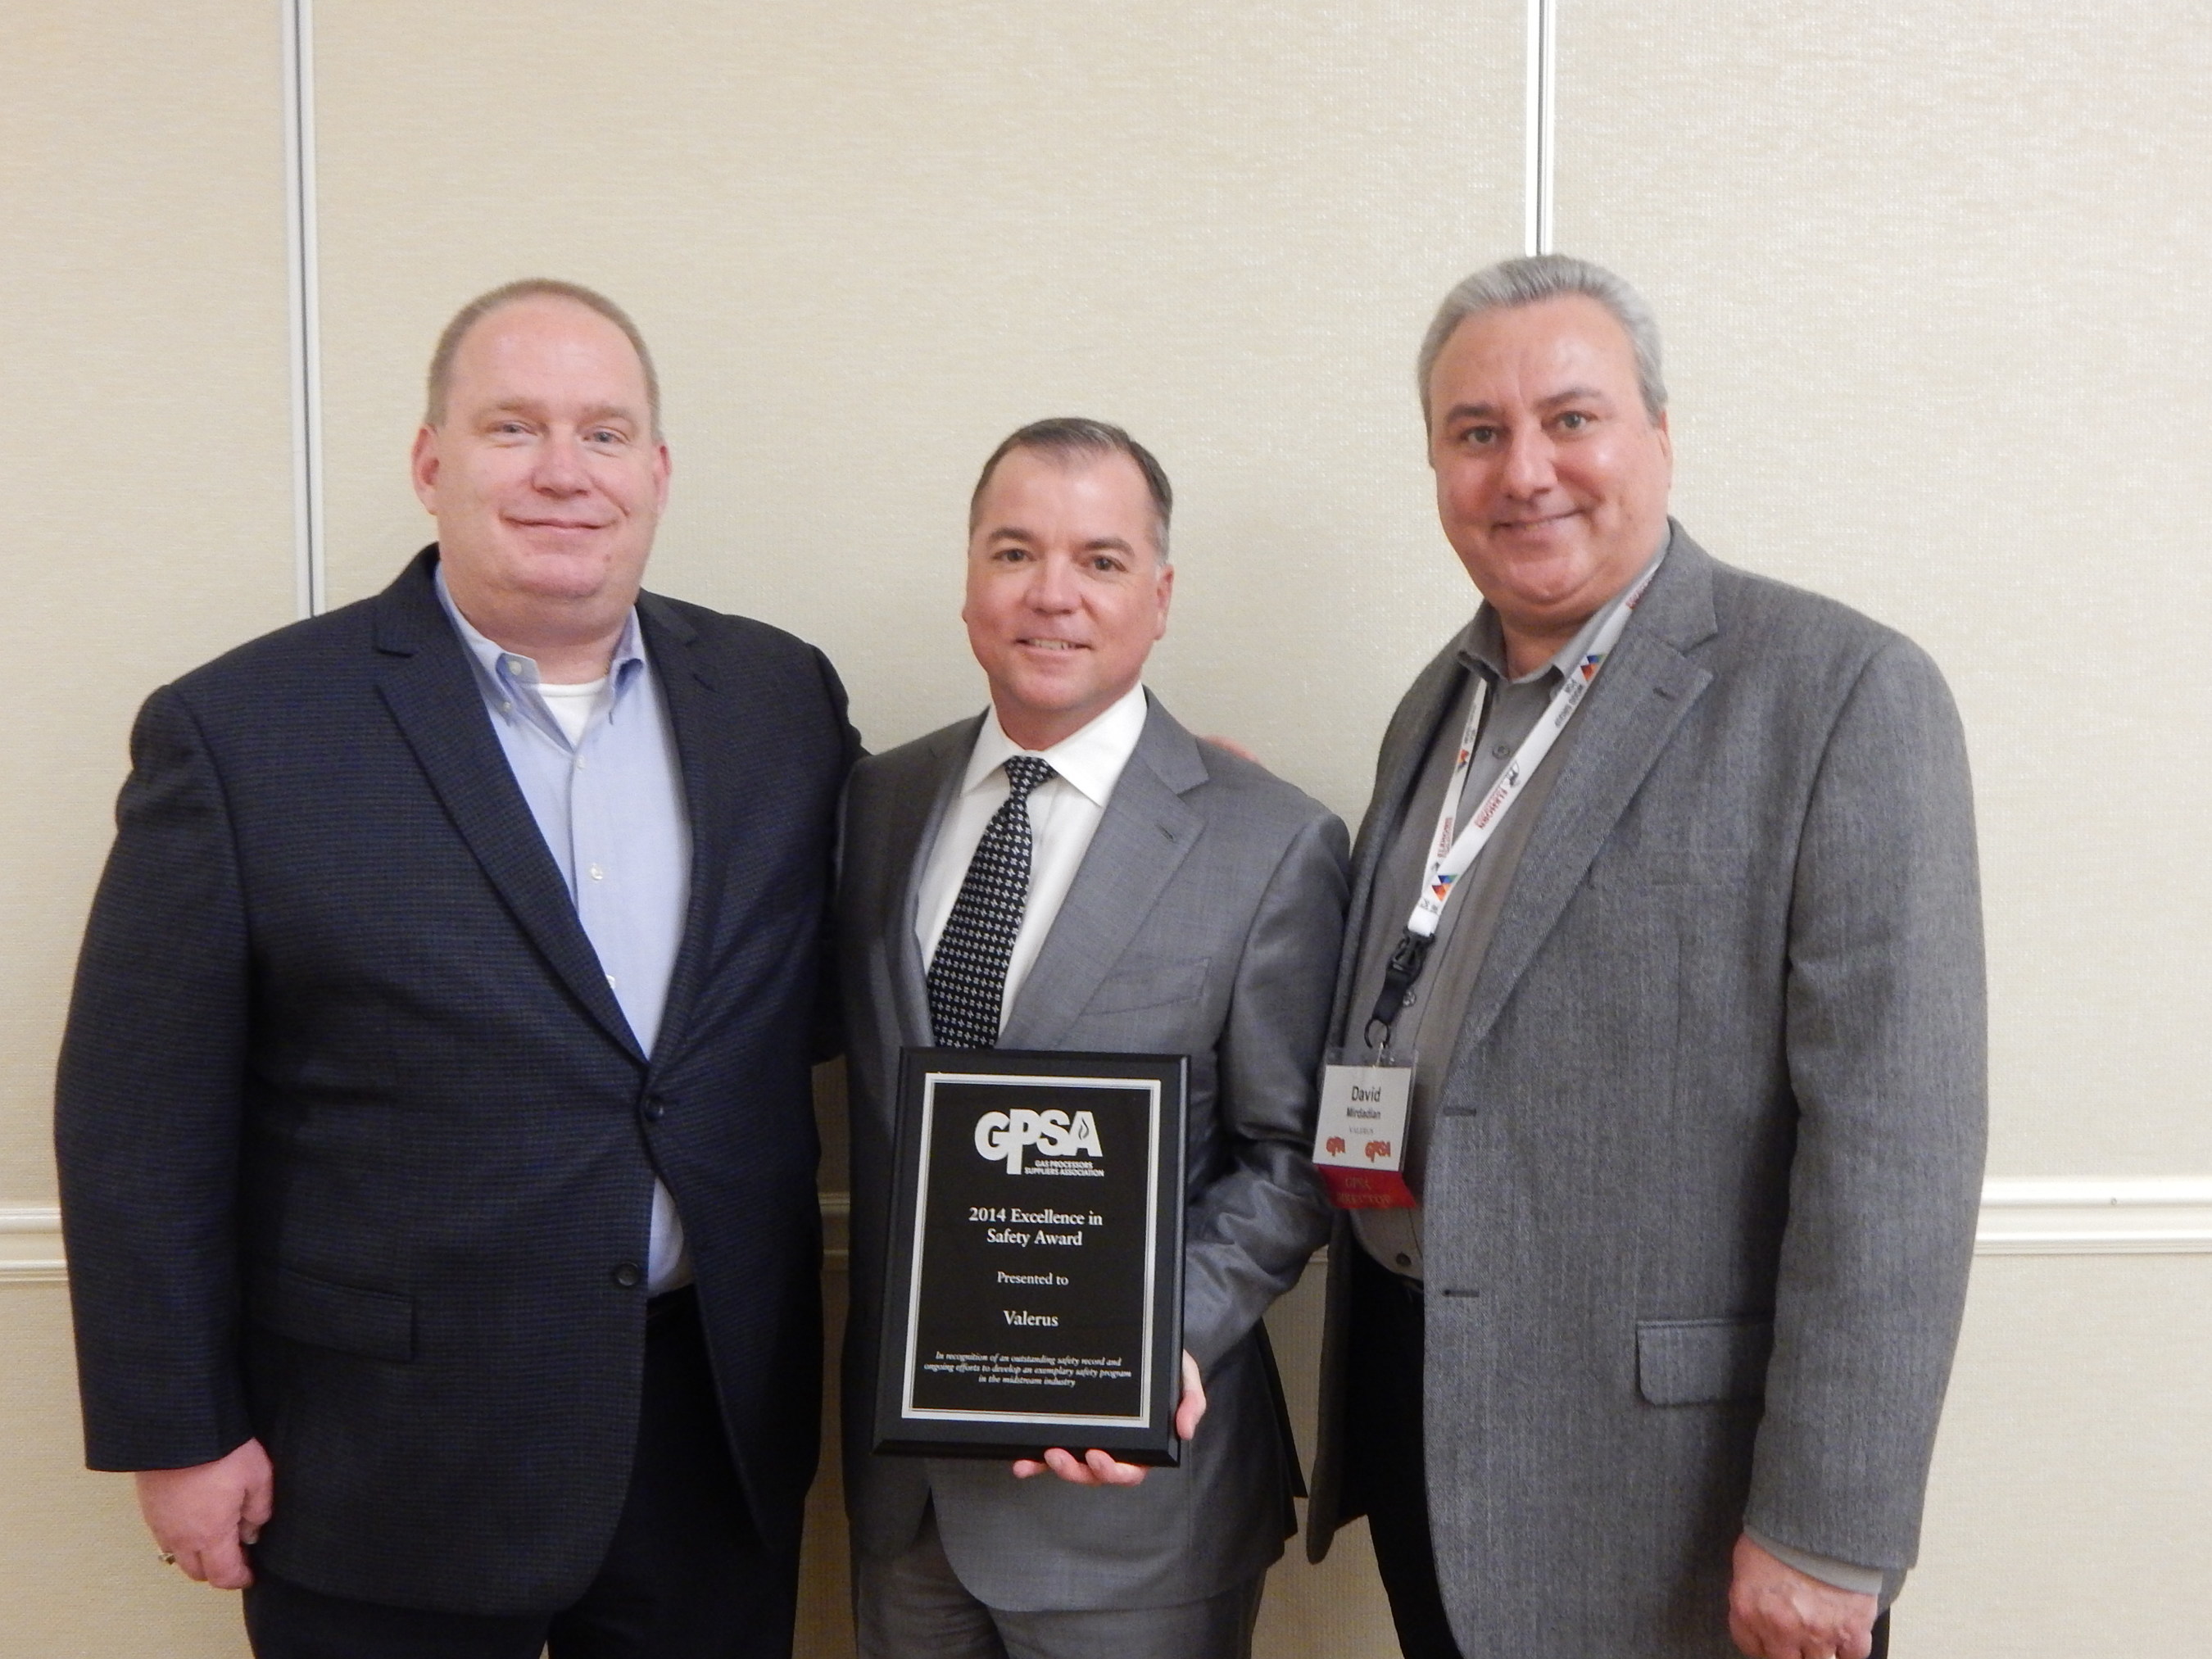 Valerus has been awarded a Gas Processors Suppliers Association Company Safety Award. Pictured from Valerus: Roger Lemke, Director of Health and Safety; Jim Gill, Chief Operating Officer; and David Mirdadian, Director of Business Development Processing and Treating.